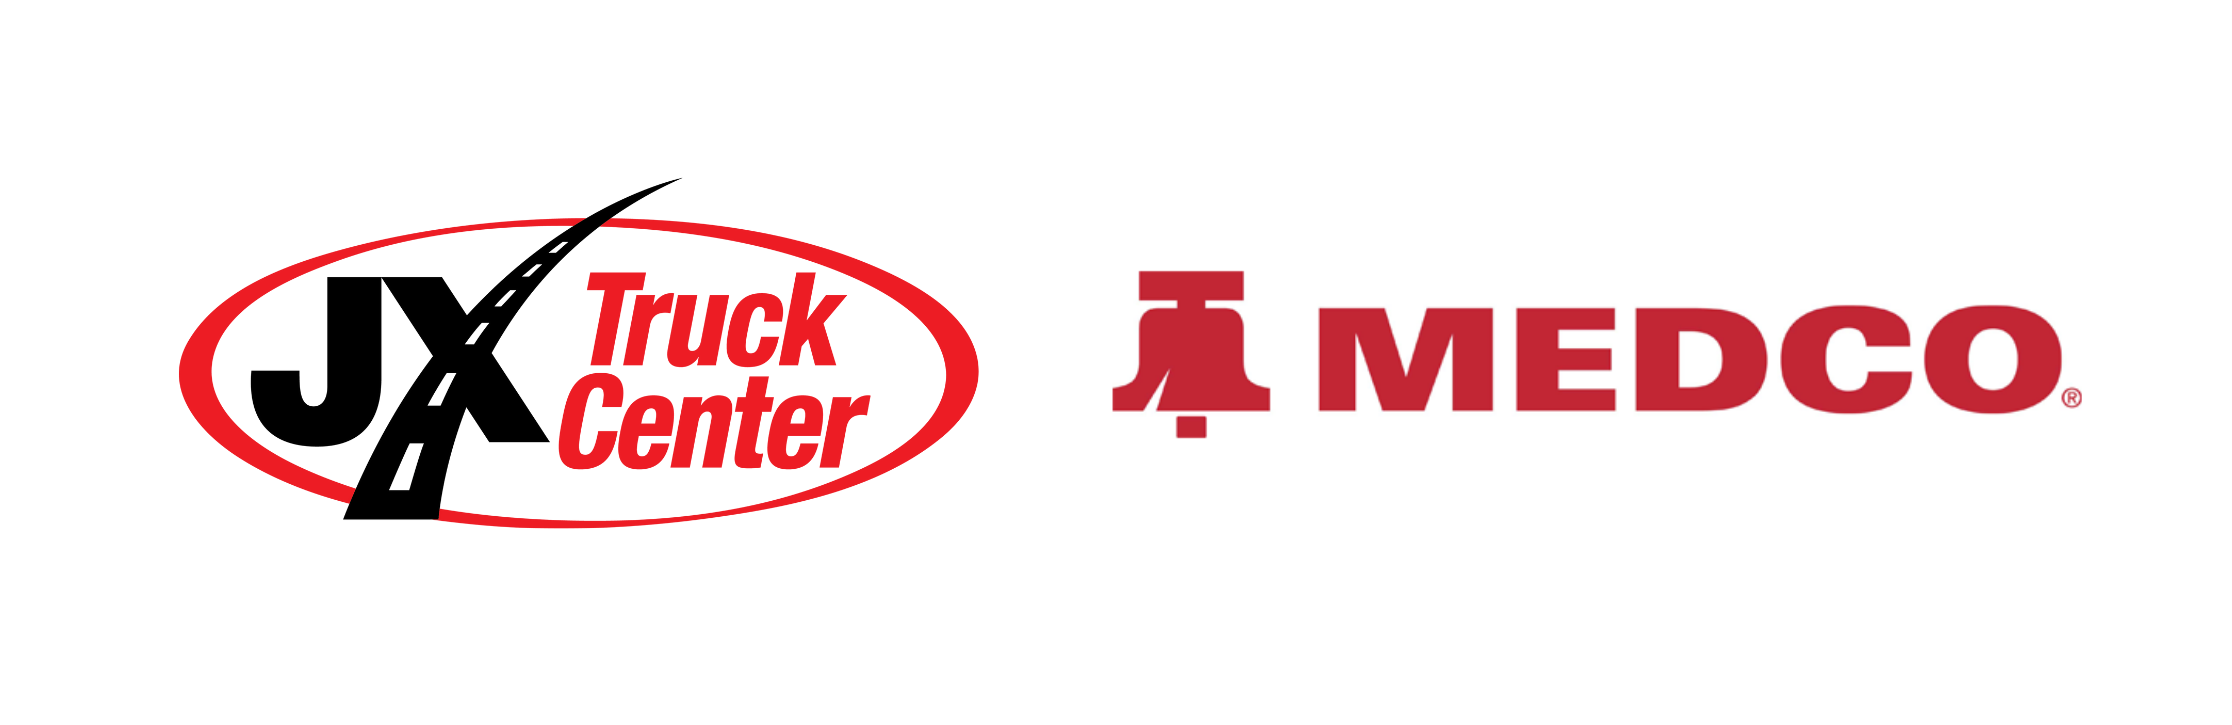 JX Truck Center Logo with the MEDCO logo MEDCO Shop Tools & Equipment NOW Available at JX Truck Center